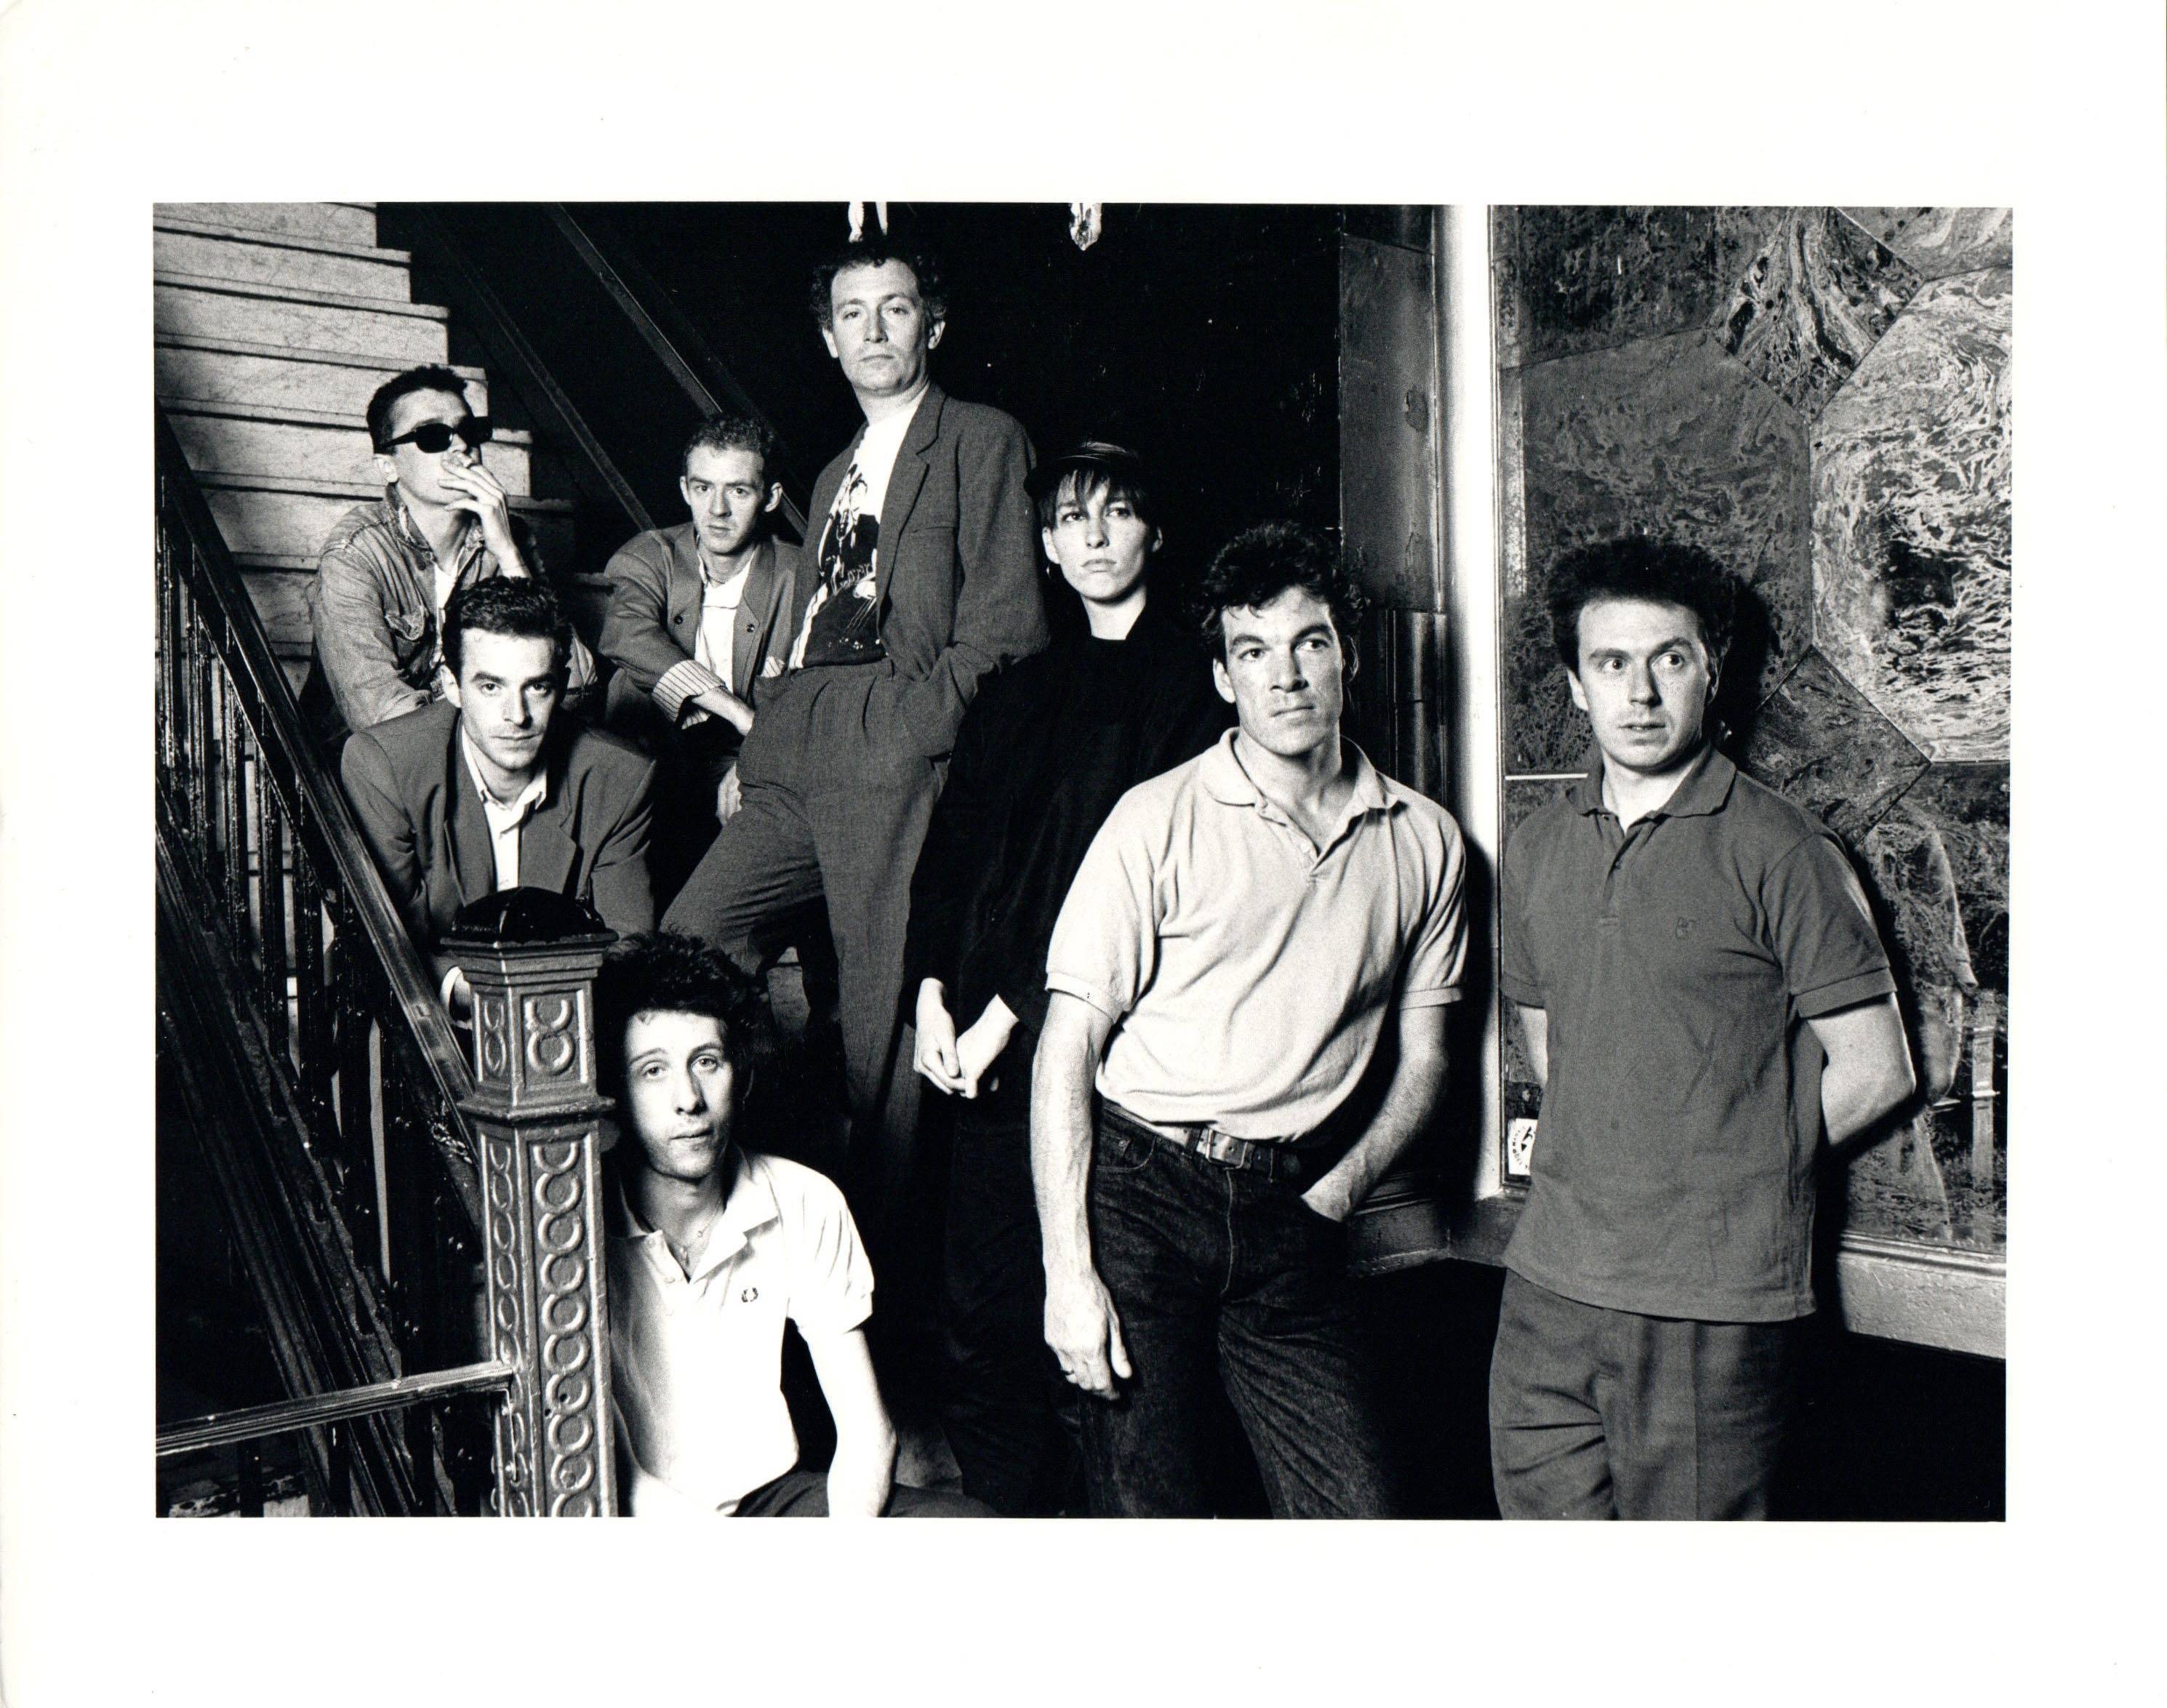 Gary Gershoff Black and White Photograph - The Pogues Group Portrait at The Ritz Vintage Original Photograph